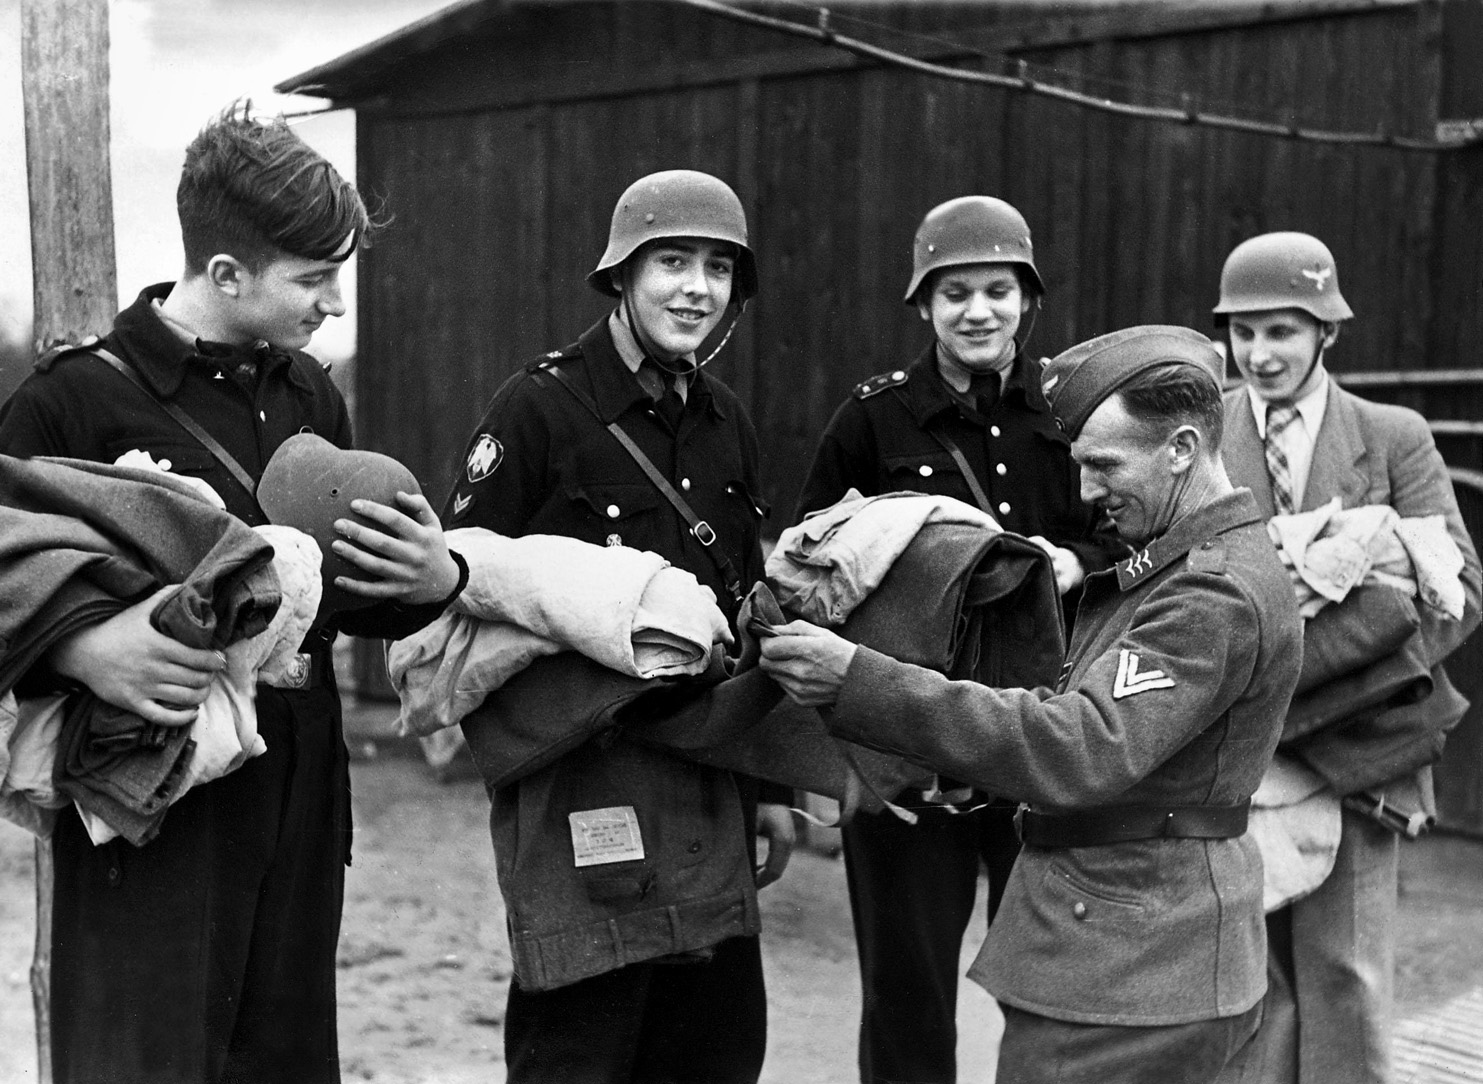 Smiling Hitler Youth members, one still in civilian coat and tie, are issued their equipment from an NCO in the Luftwaffe.